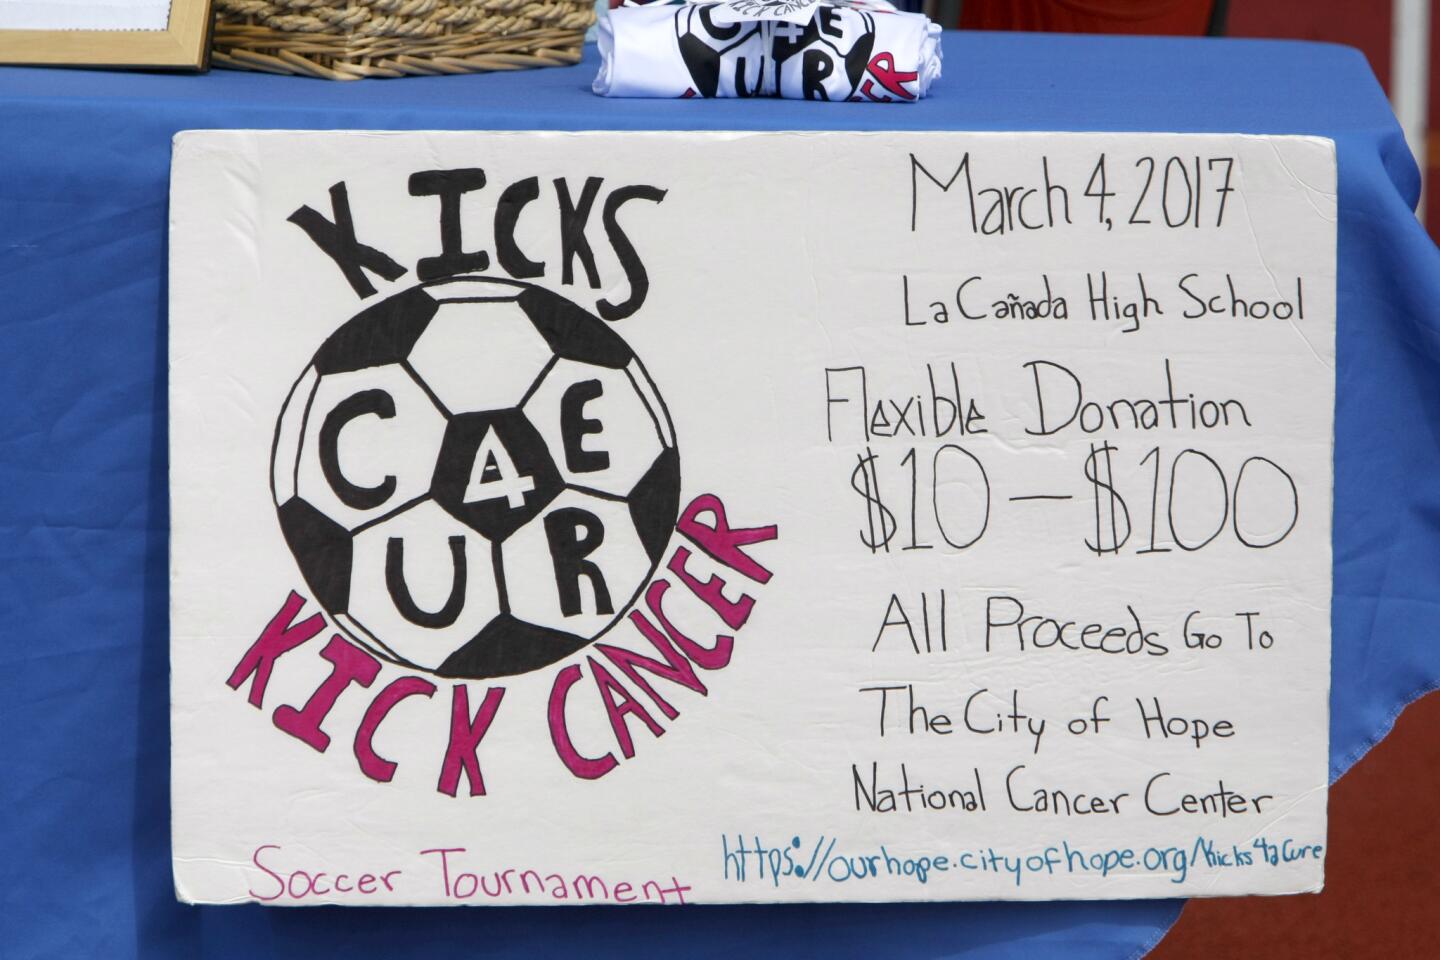 Photo Gallery: Kicks 4 a Cure raises funds for breast cancer research at City of Hope